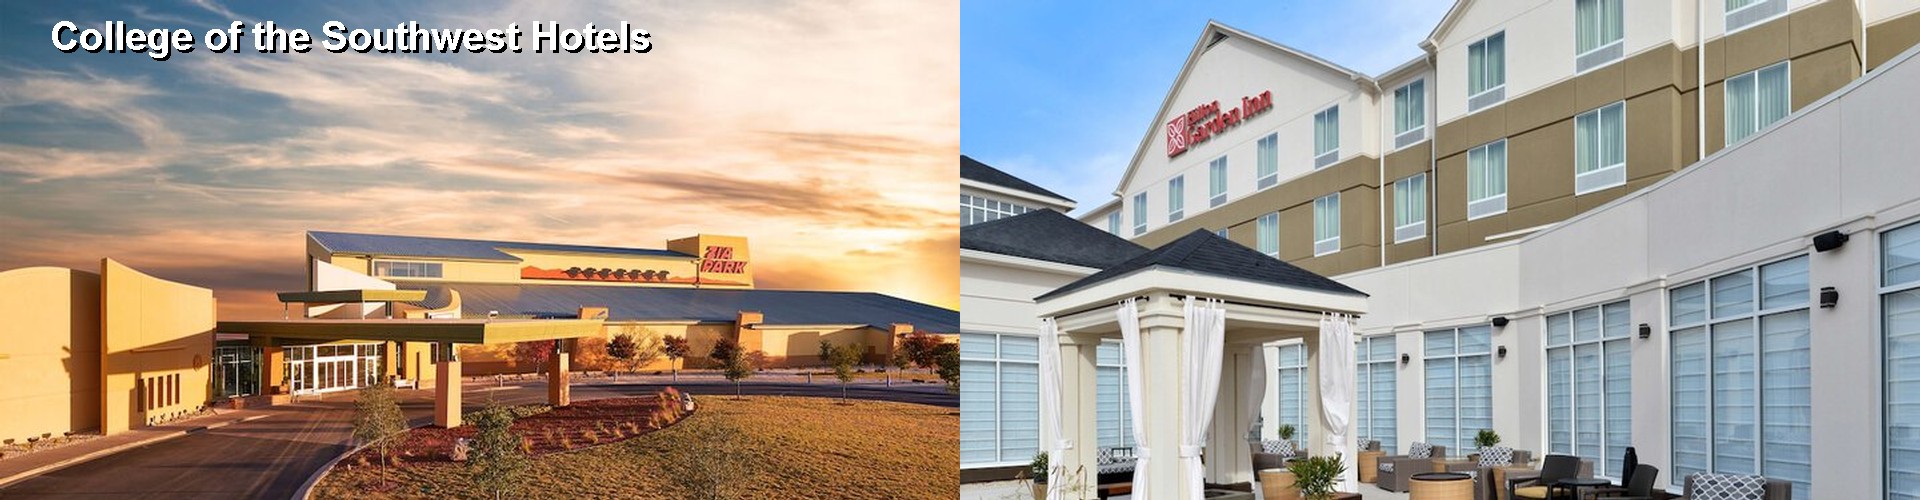 5 Best Hotels near College of the Southwest